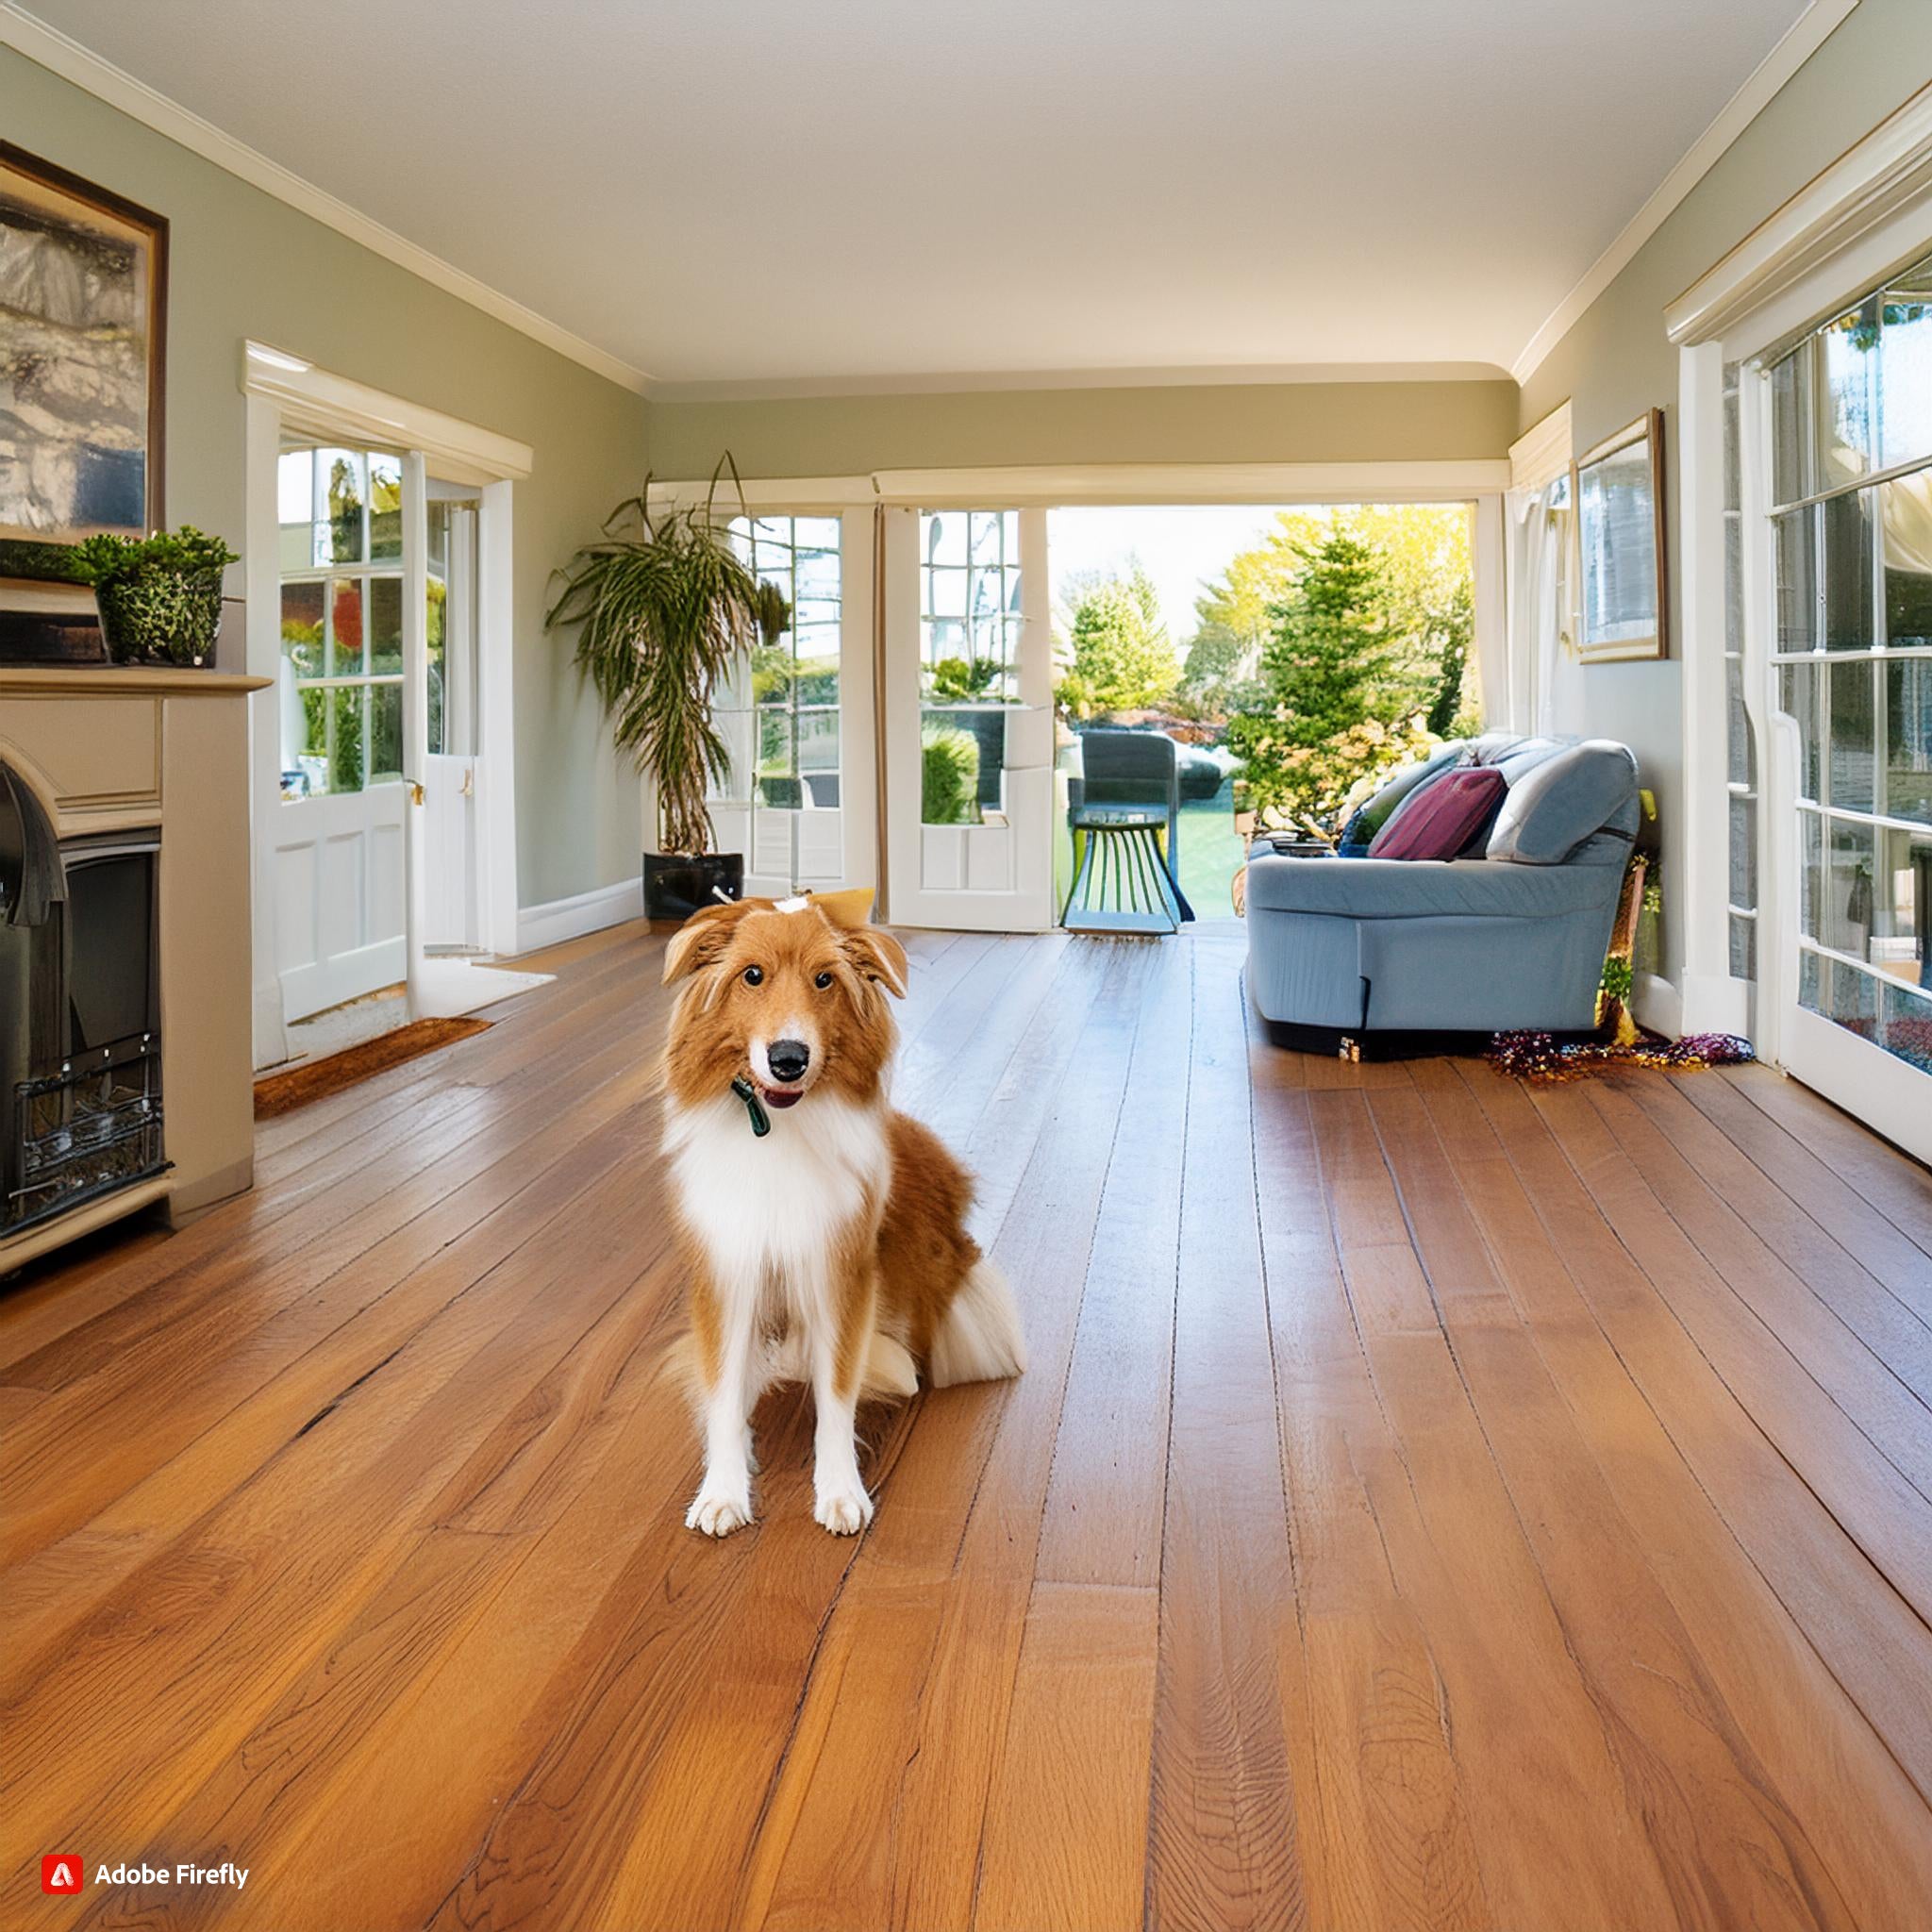 Pet-Friendly Home Design Tips for Your Furry Family